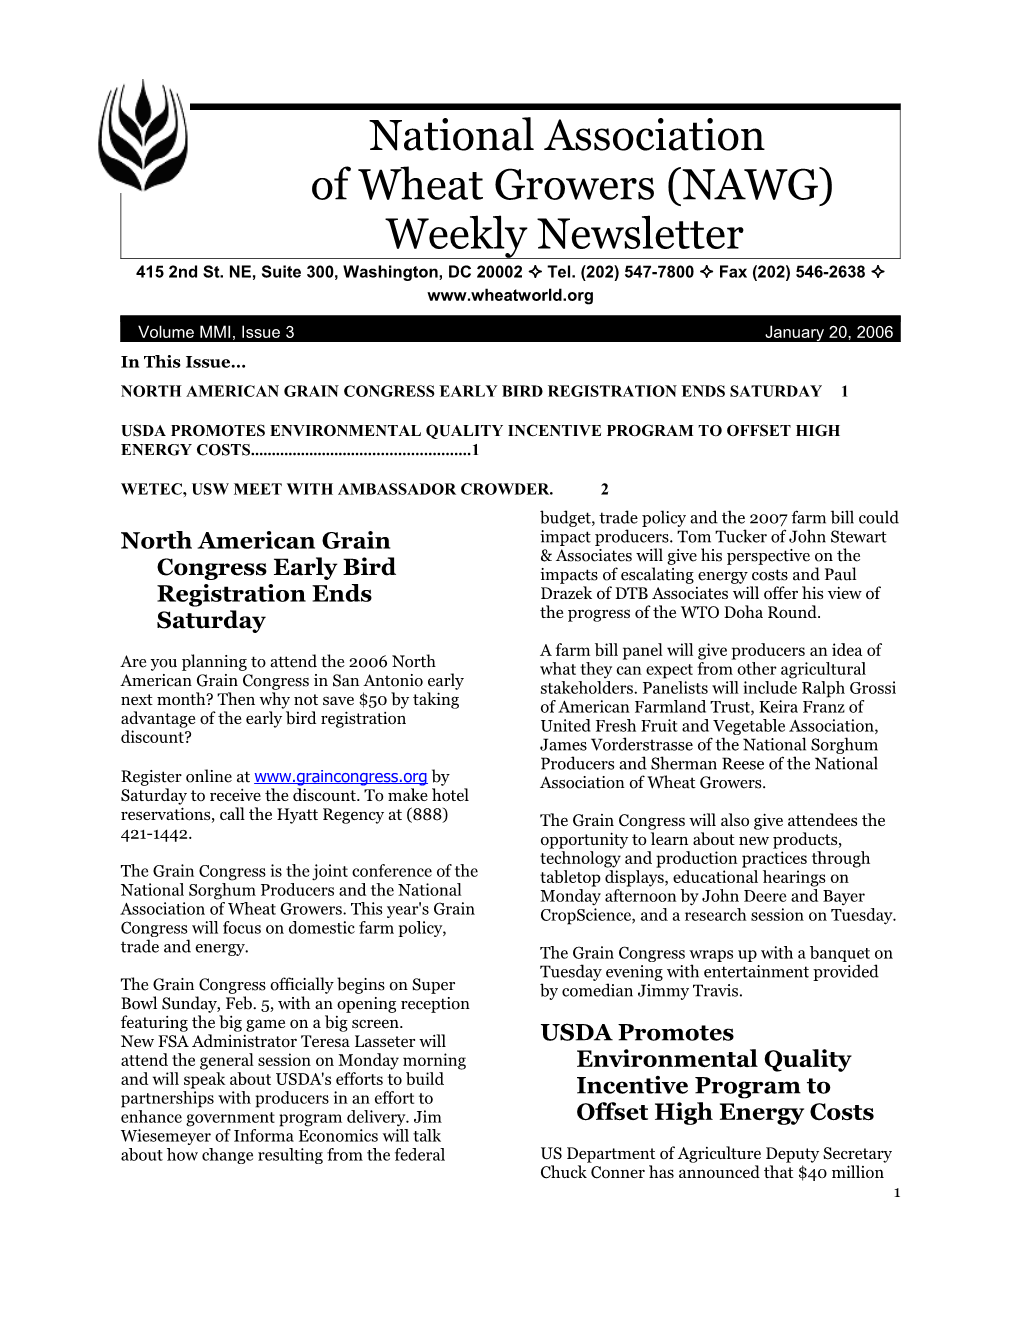 NAWG Weekly Newsletter Template